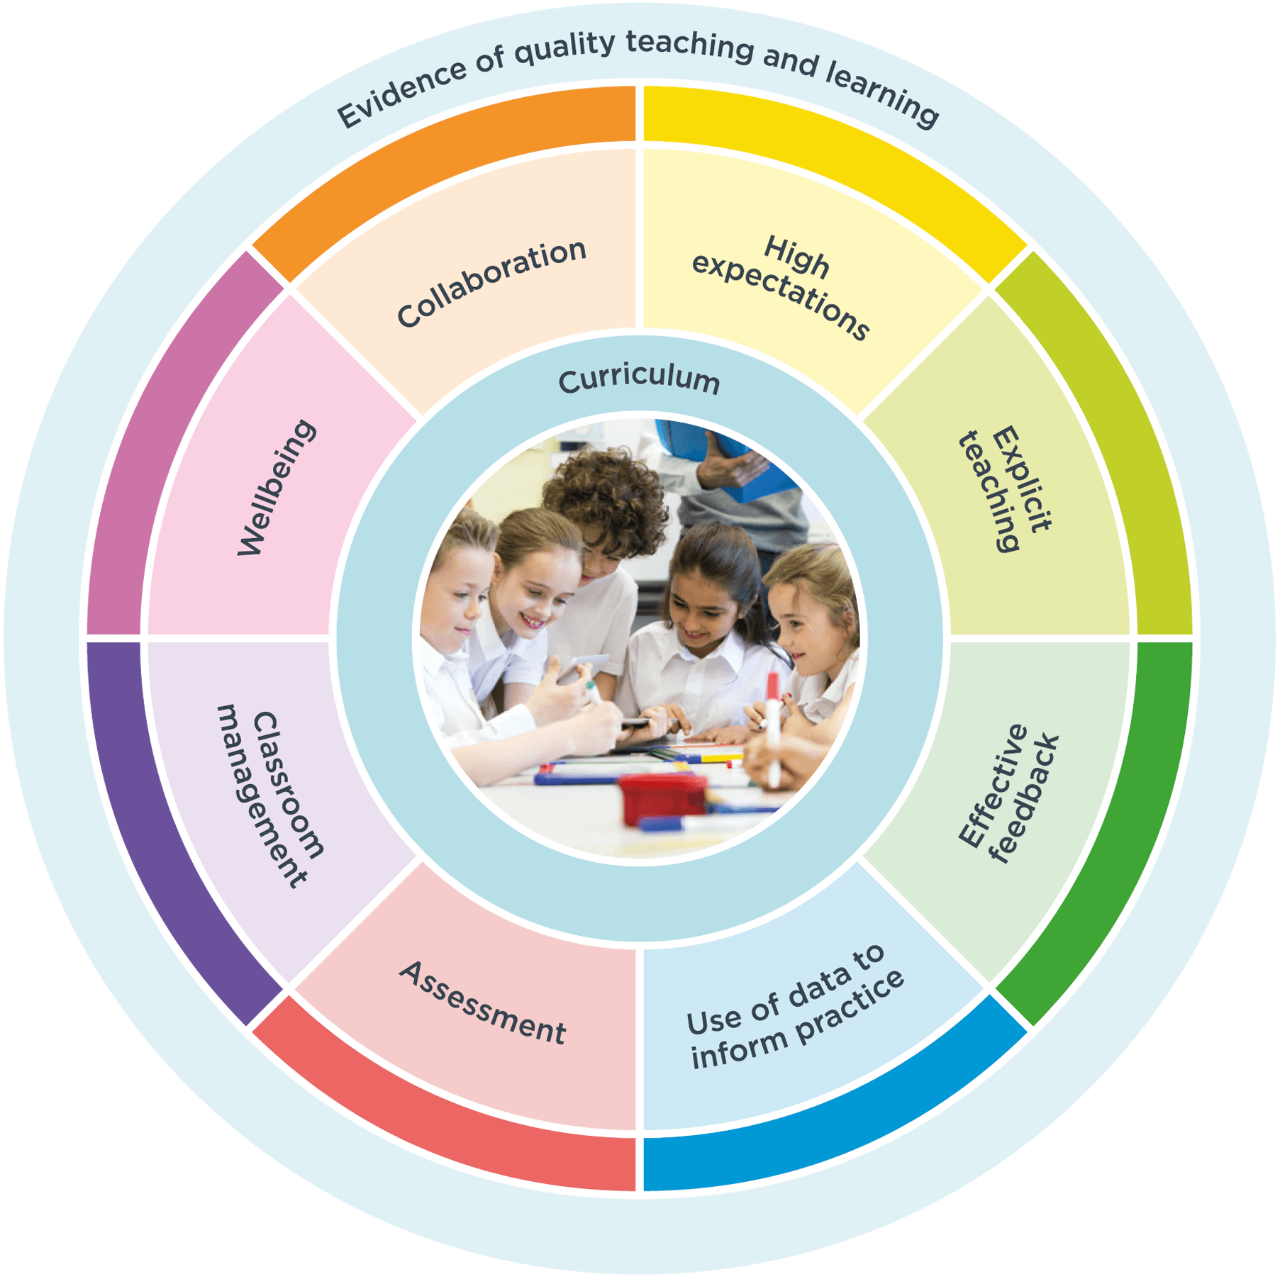 Circular diagram showing the eight themes from the what works best research report. 